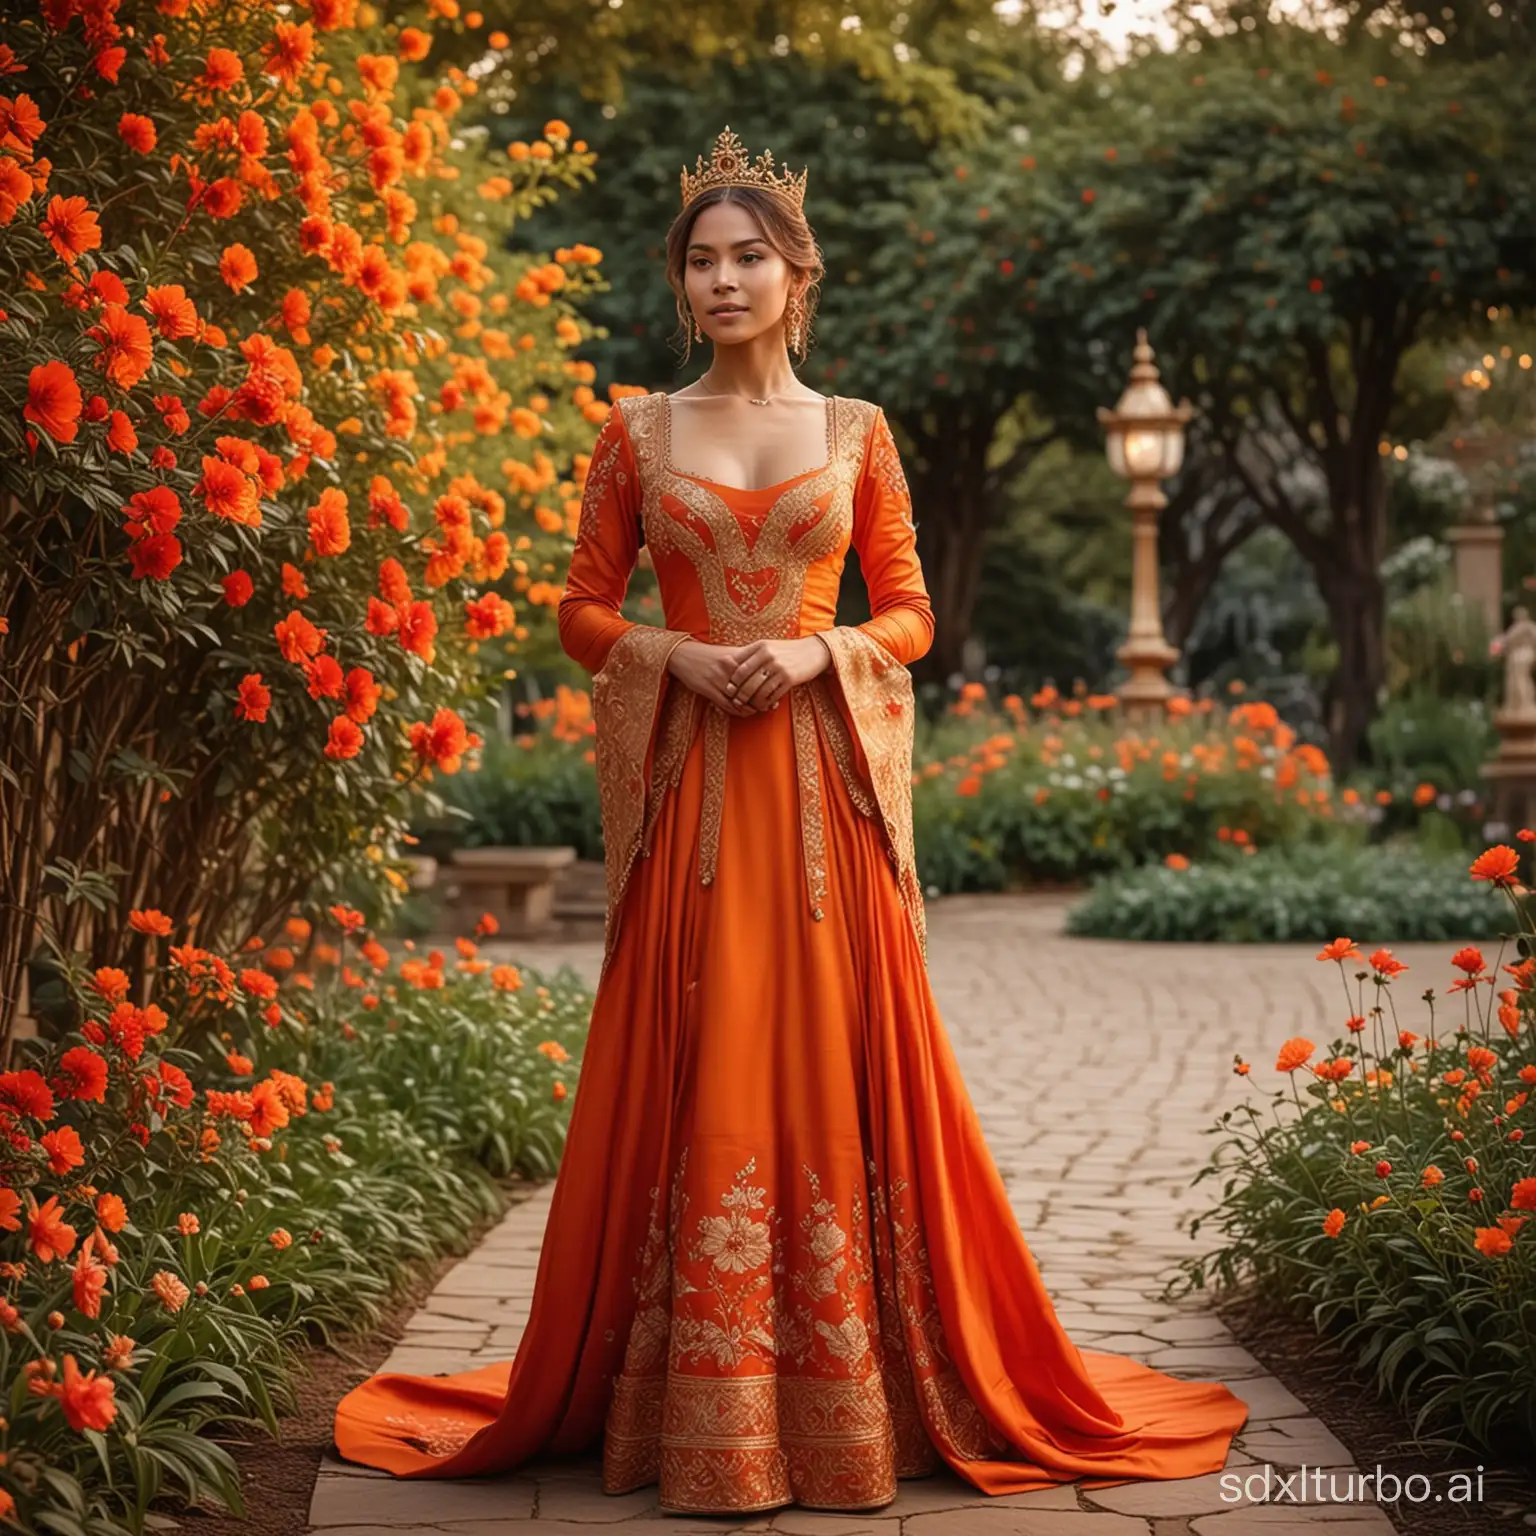 Full body portrait of a light brown skin woman, regal orange royal outfit, beautiful royal dress, elegant clothes, simple gold crown, gentle expression, dynamic pose, standing gracefully, fire nation, standing in beautiful garden with red and orange flowers, warm lighting